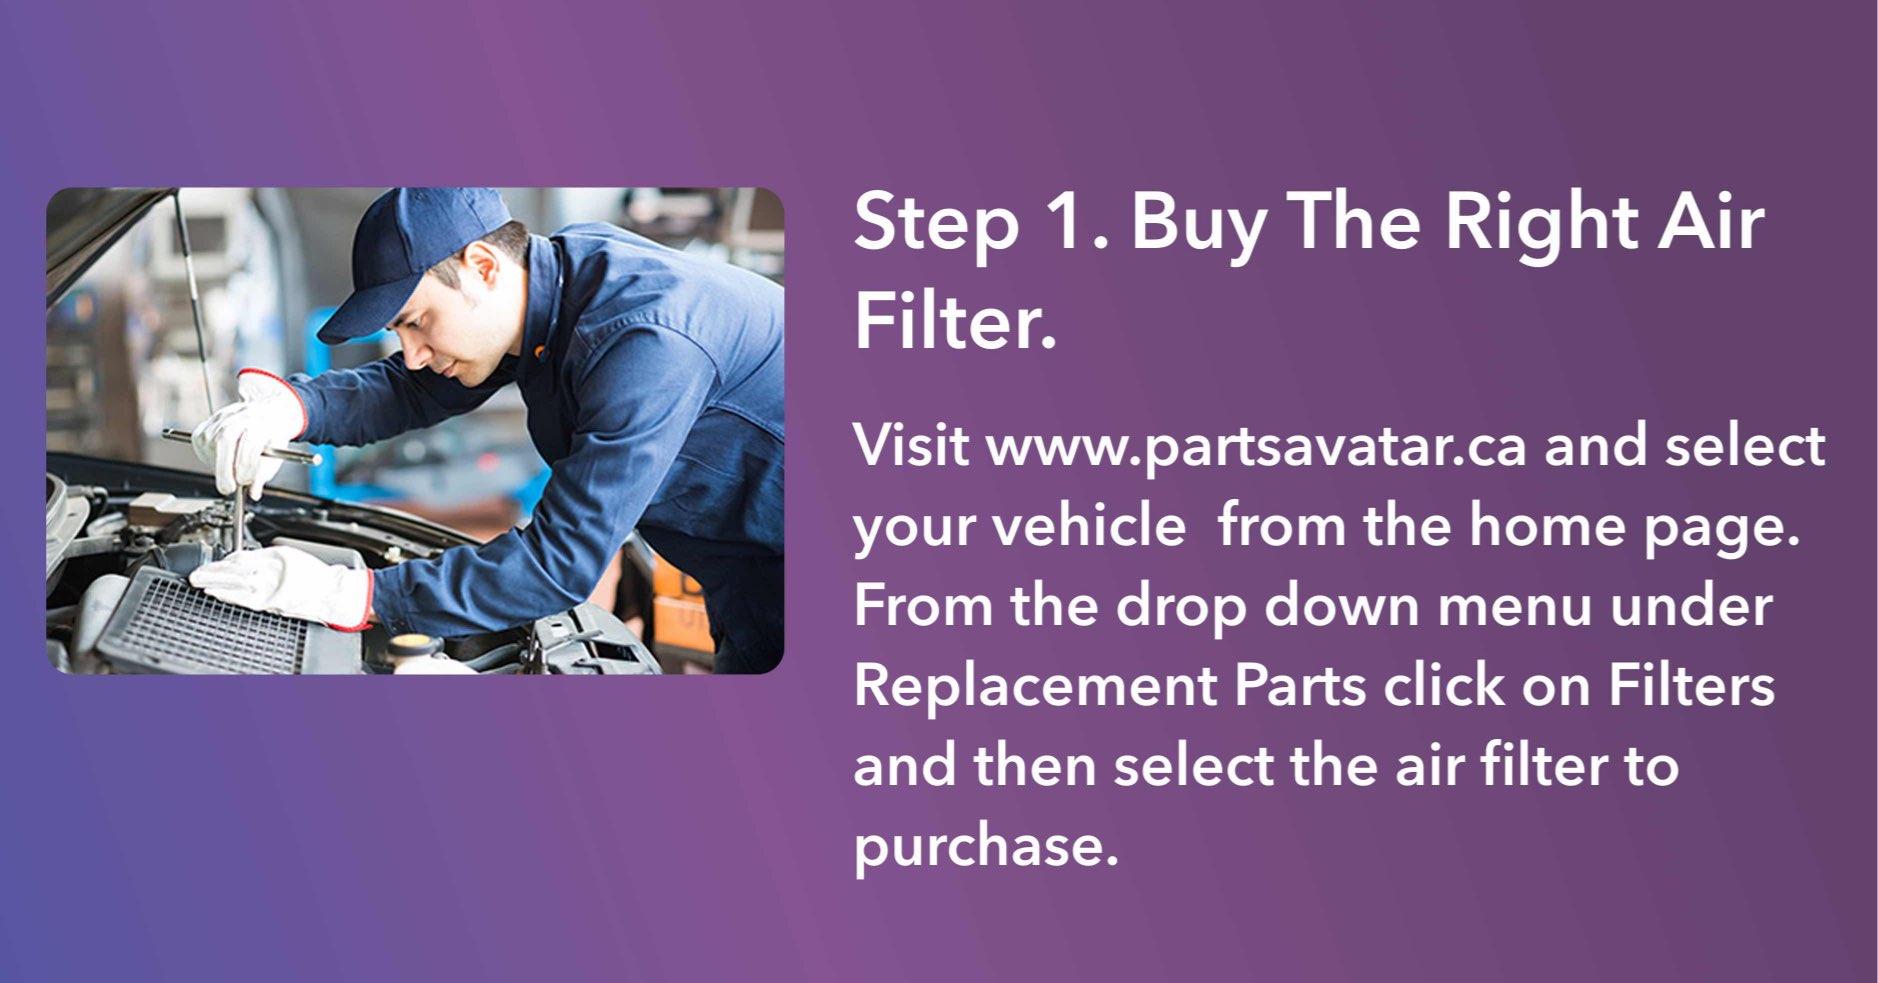 Visit www.partsavatar.ca and select your vehicle  from the home page. From the drop down menu under Replacement Parts click on Filters and then select the air filter to purchase.